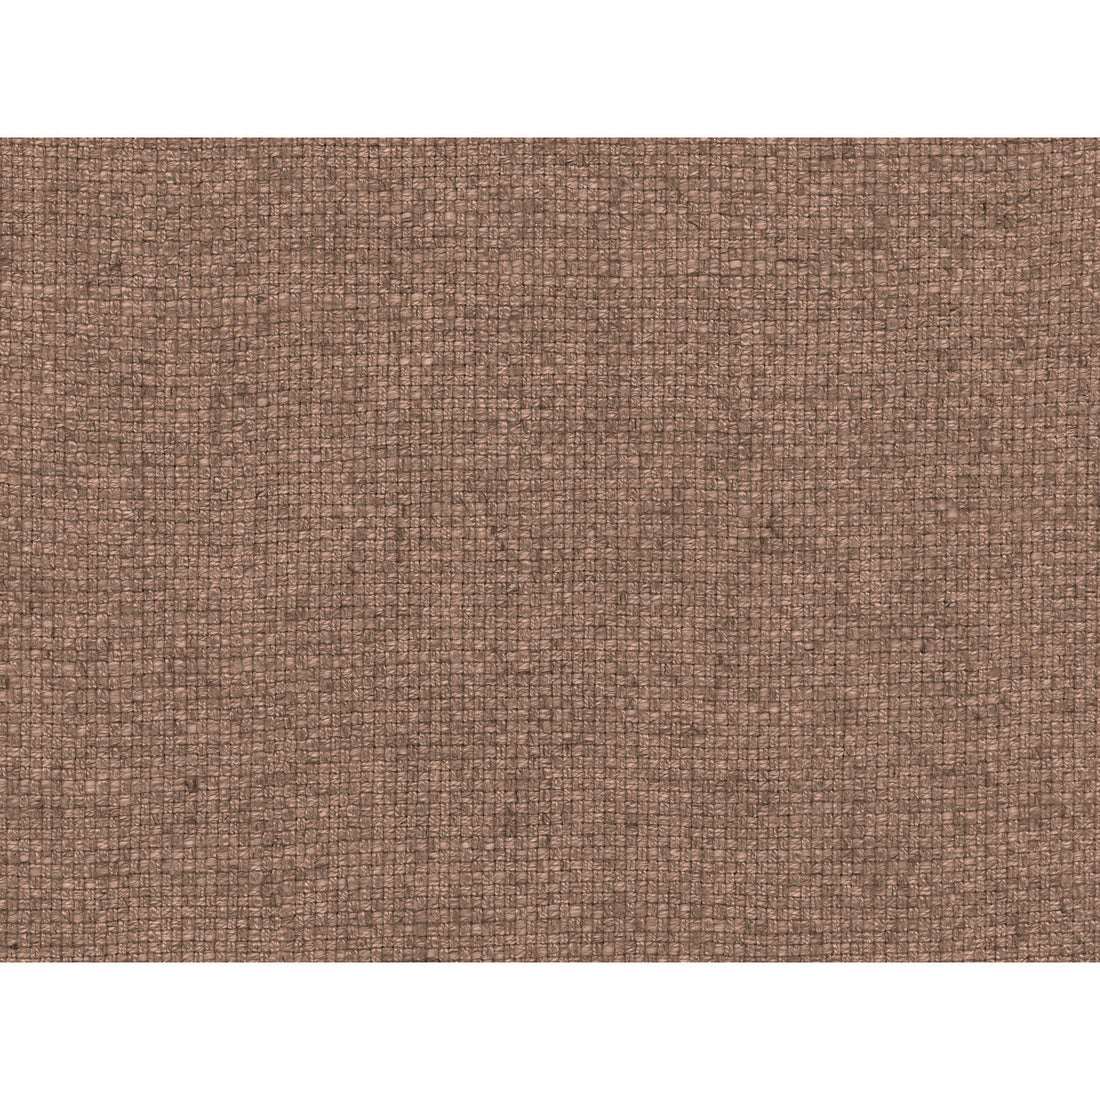 Plush Linen fabric in mink color - pattern 31816.106.0 - by Kravet Couture